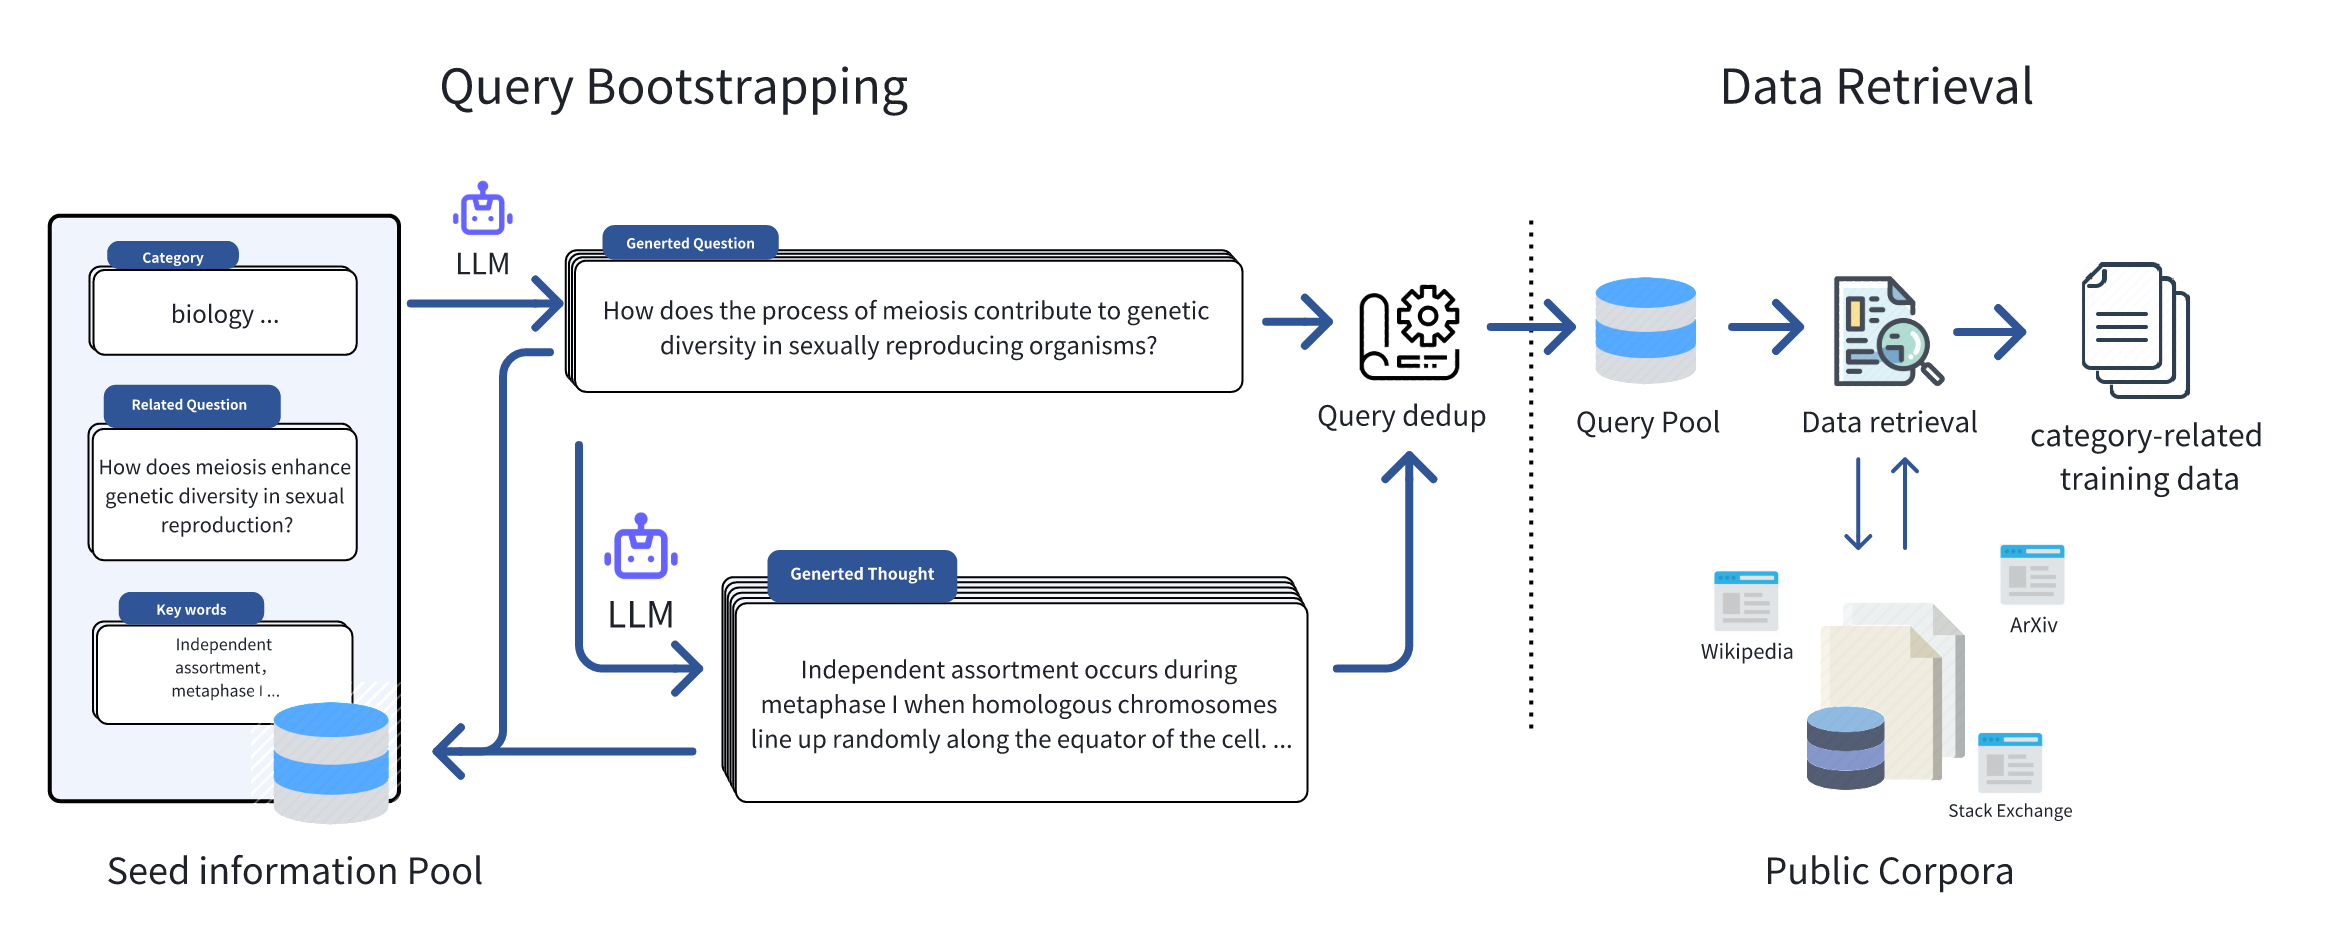 The overview of Query of CC’s two major components: Query Bootstrapping and Data Retrieval.